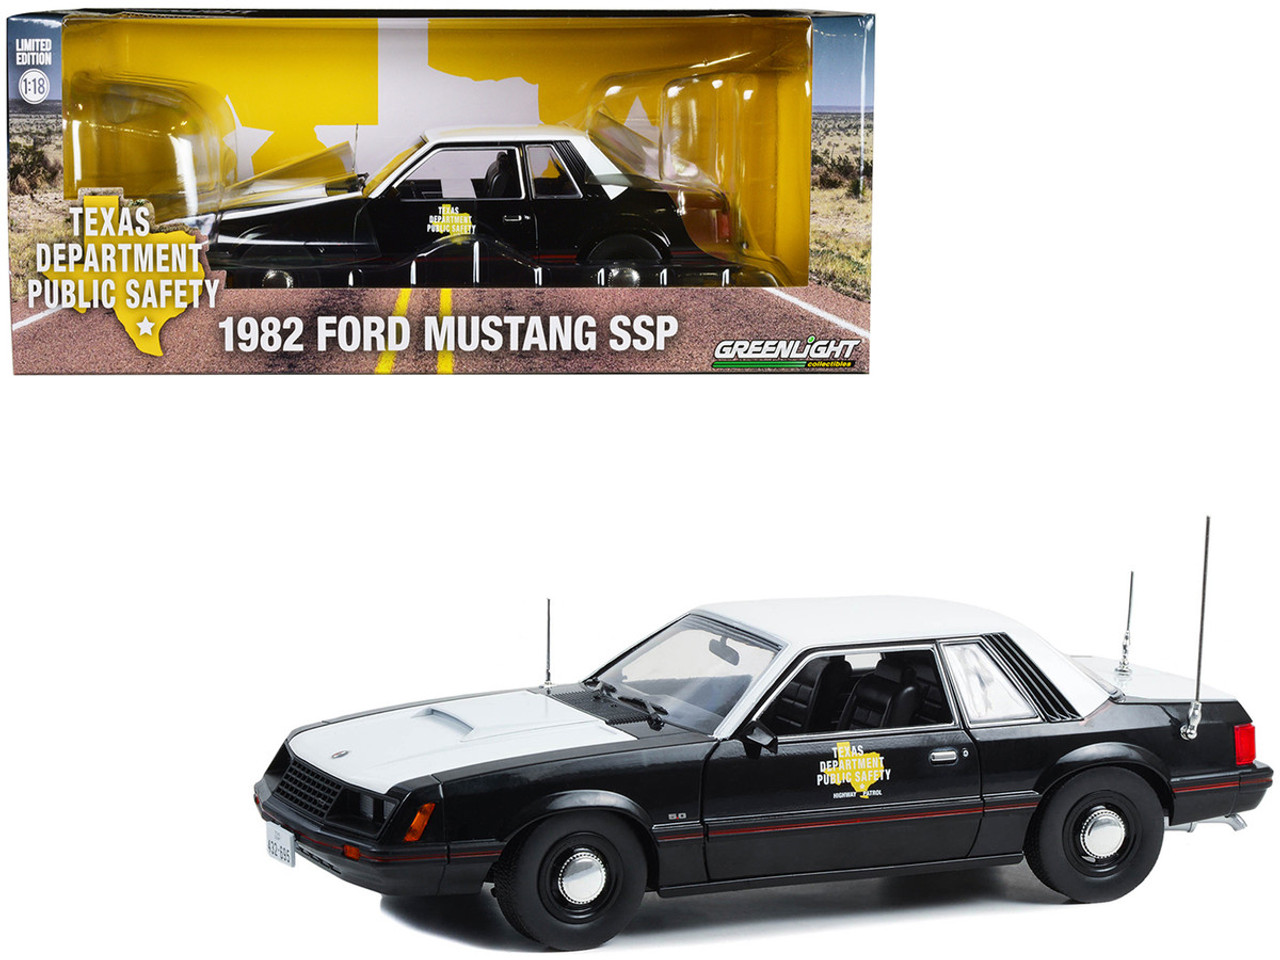 1/18 Greenlight 1982 Ford Mustang SSP Texas Department of Public Safety Diecast Car Model